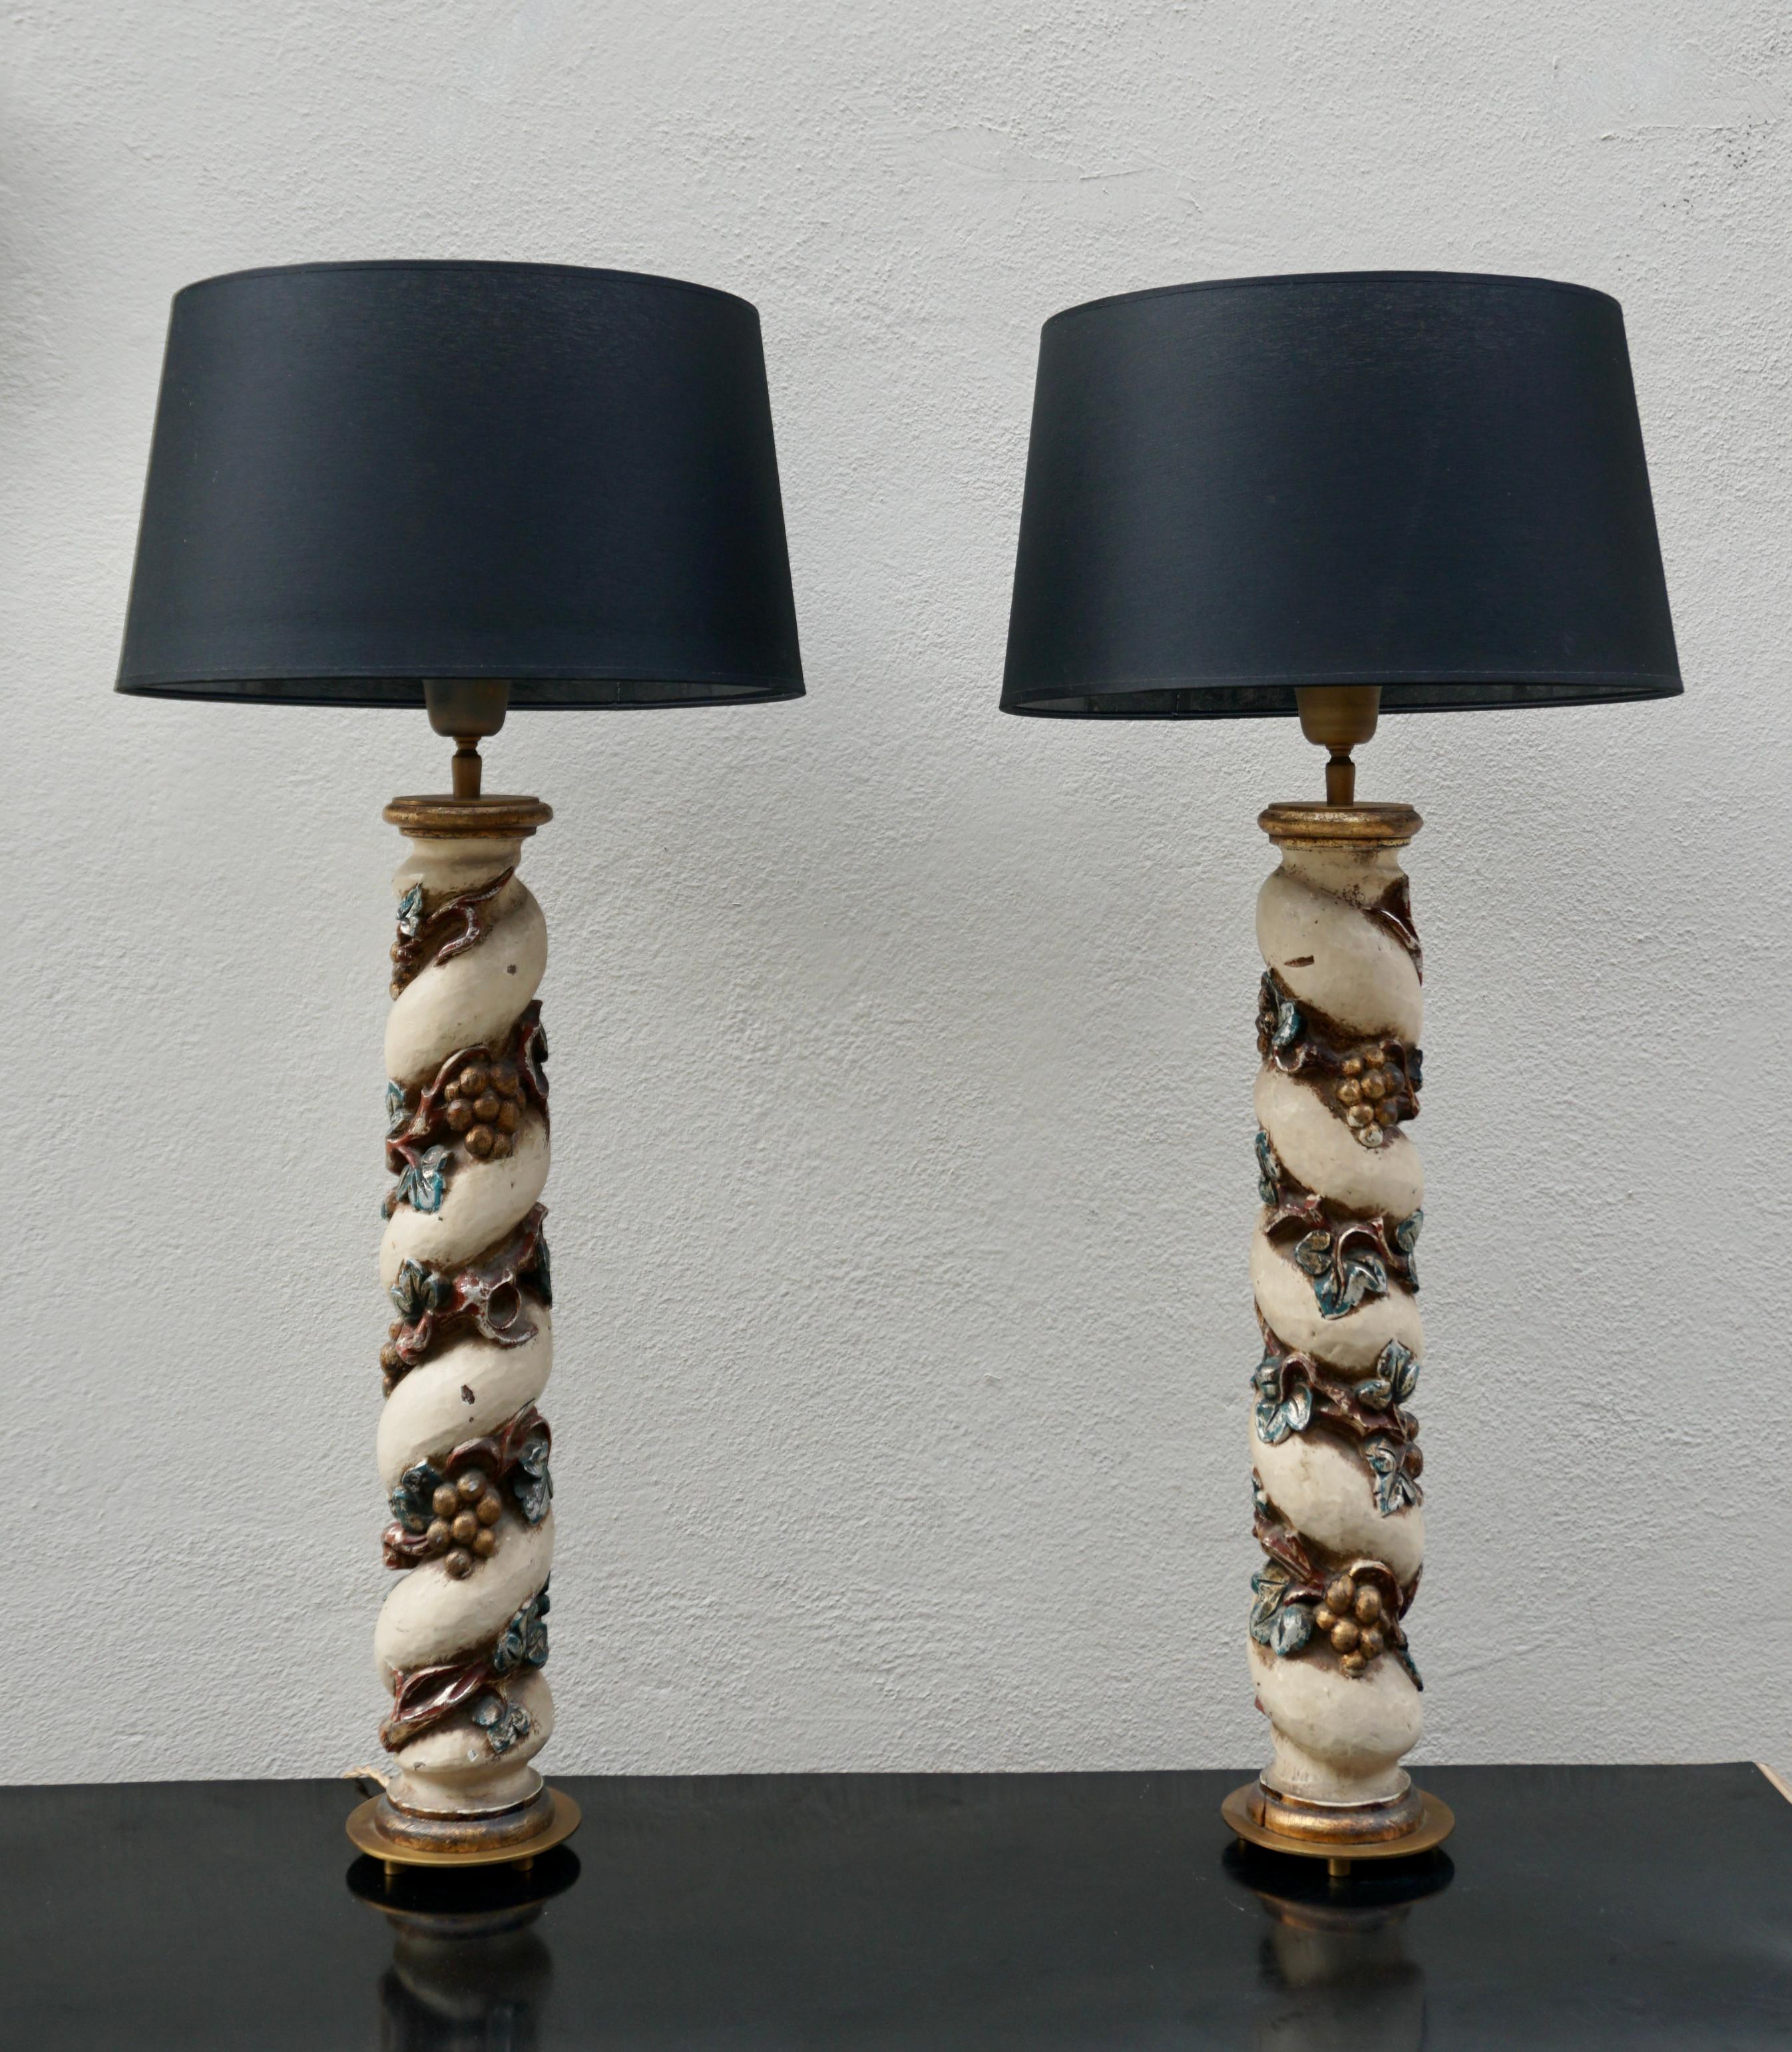 A very beautiful pair of twisted 20th century carved Italian Solomonic Columns made into table lamps and mounted on round brass bases. Created in Italy during the 19th century, each of this pair of wooden fragments features a turned Solomonic column